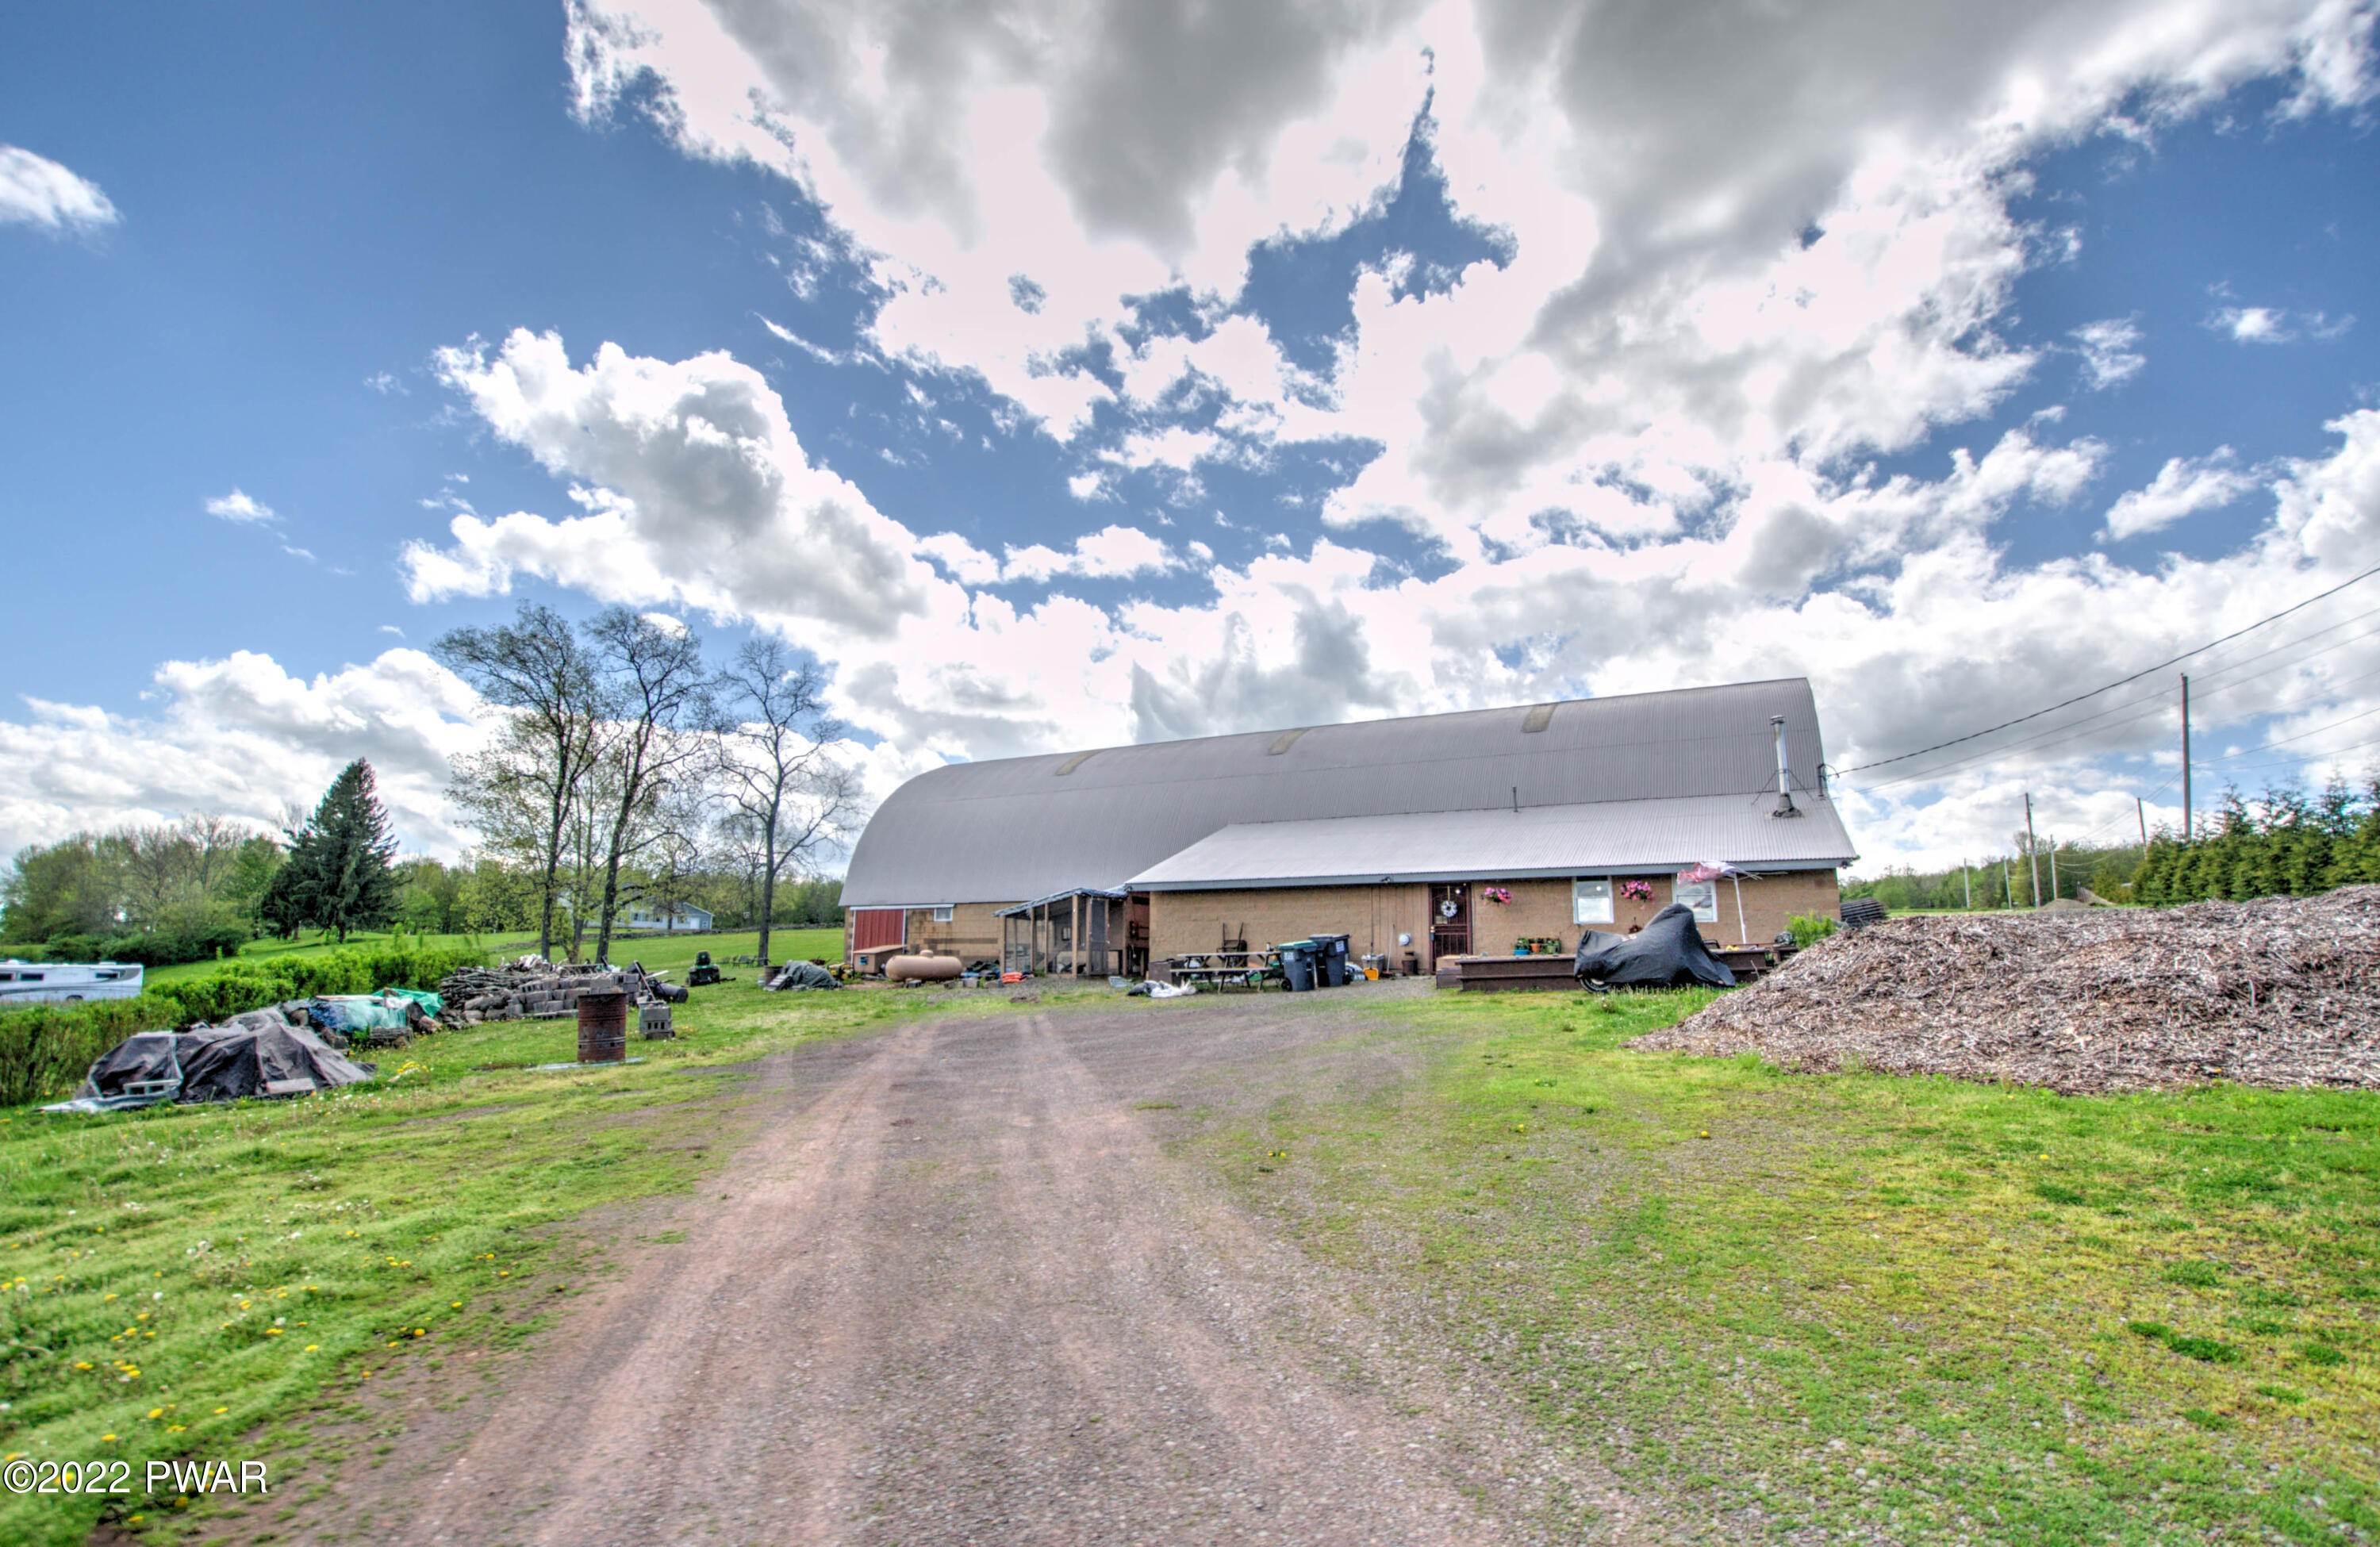 26. Farm and Ranch Properties for Sale at 118 Savitz Rd Moscow, Pennsylvania 18444 United States